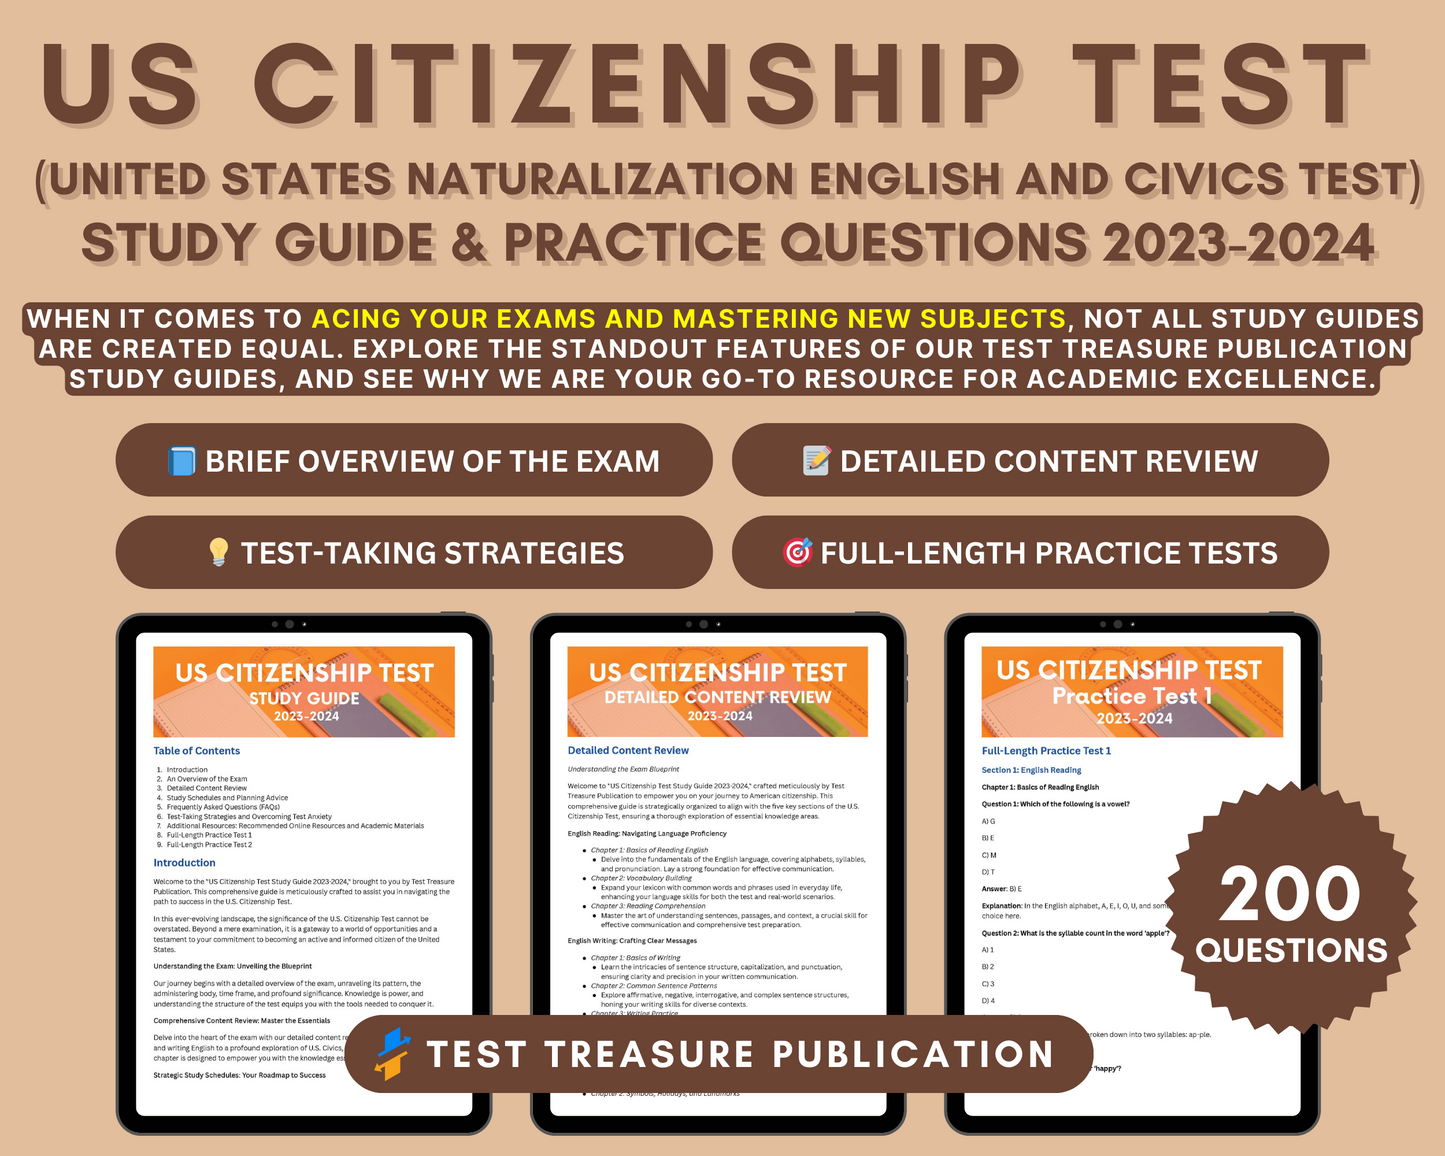 US Citizenship Test Study Guide 2023-24: In-Depth Content Review & Practice Tests - Your Citizenship Journey Starts Here